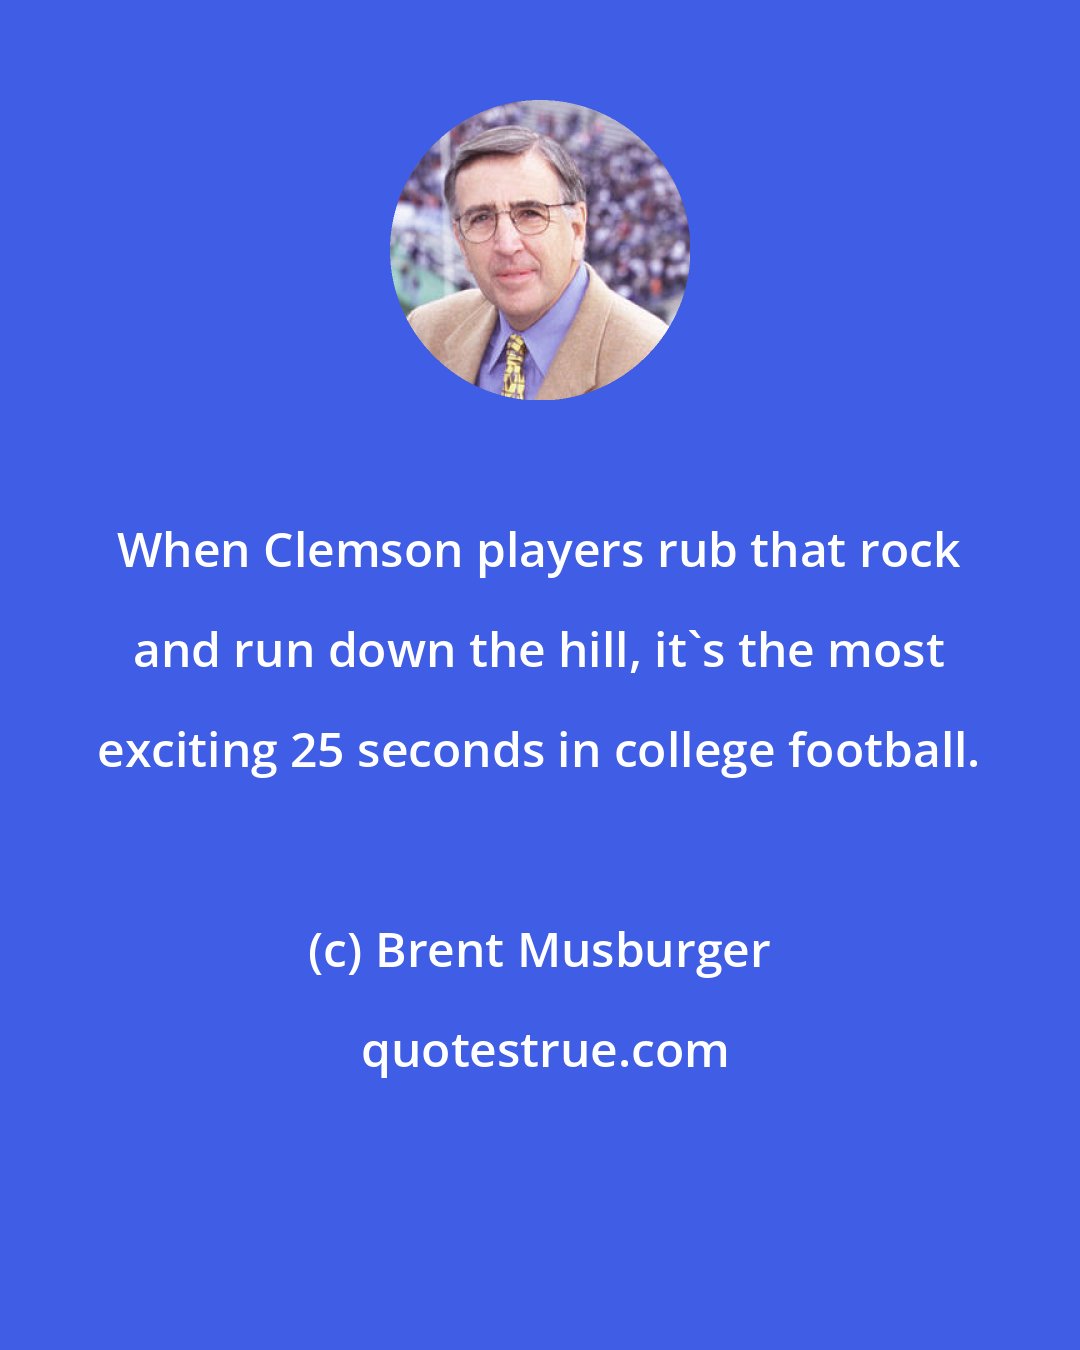 Brent Musburger: When Clemson players rub that rock and run down the hill, it's the most exciting 25 seconds in college football.